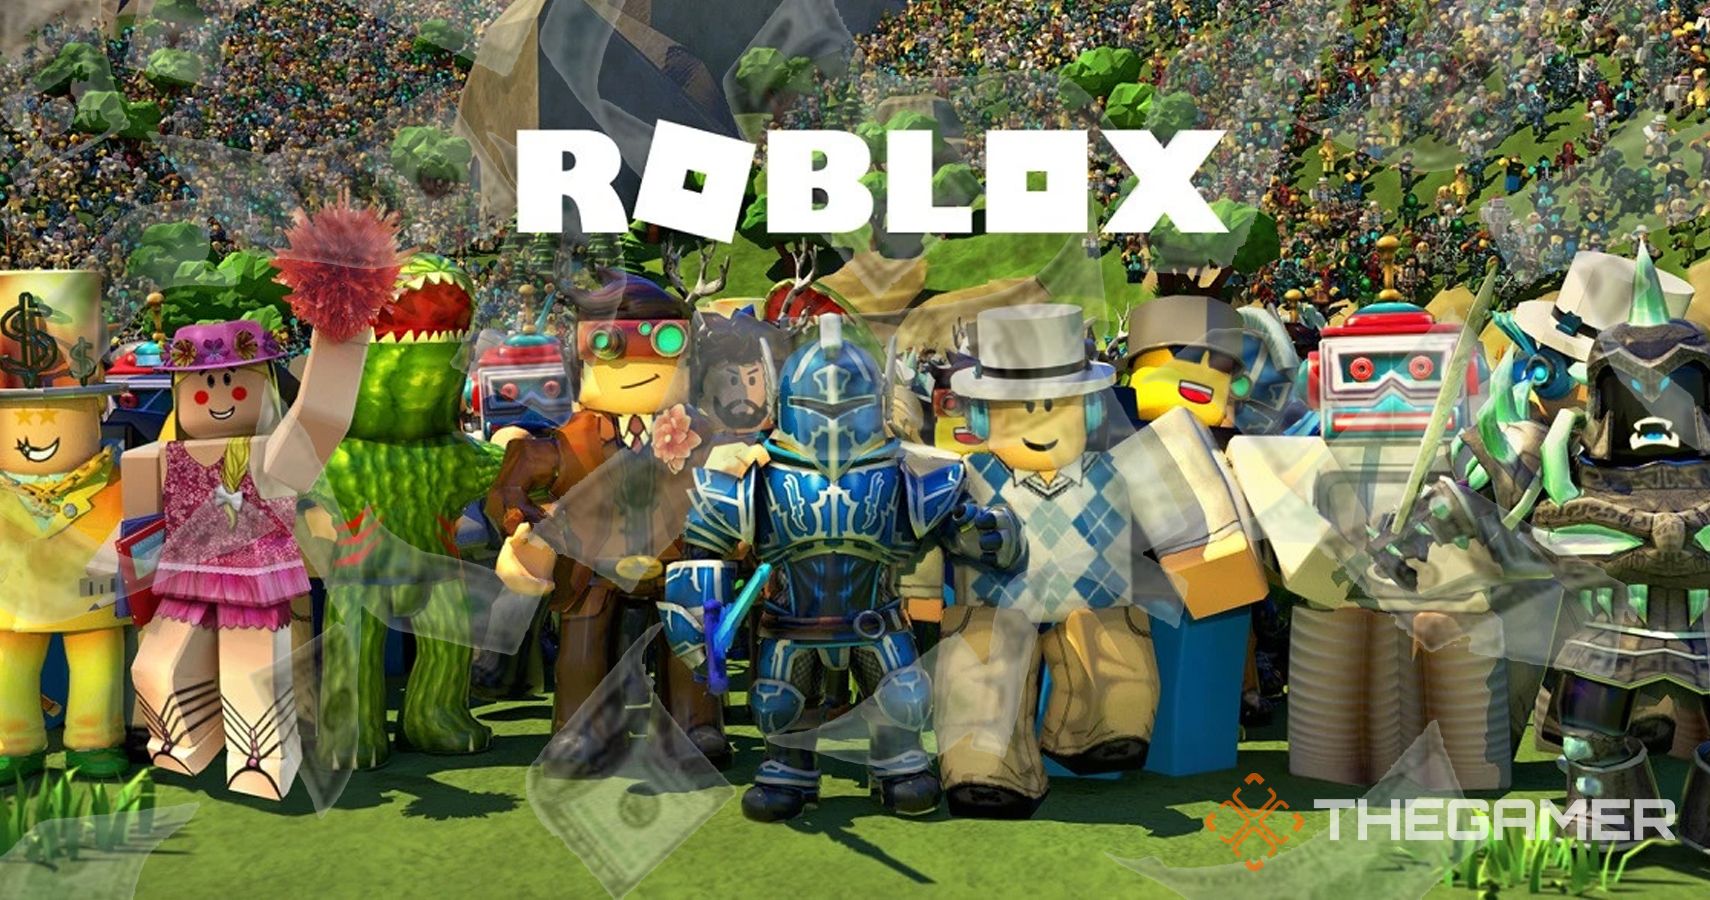 Roblox Raises 520 Million Valued At 30 Billion - assassin creed game in roblox